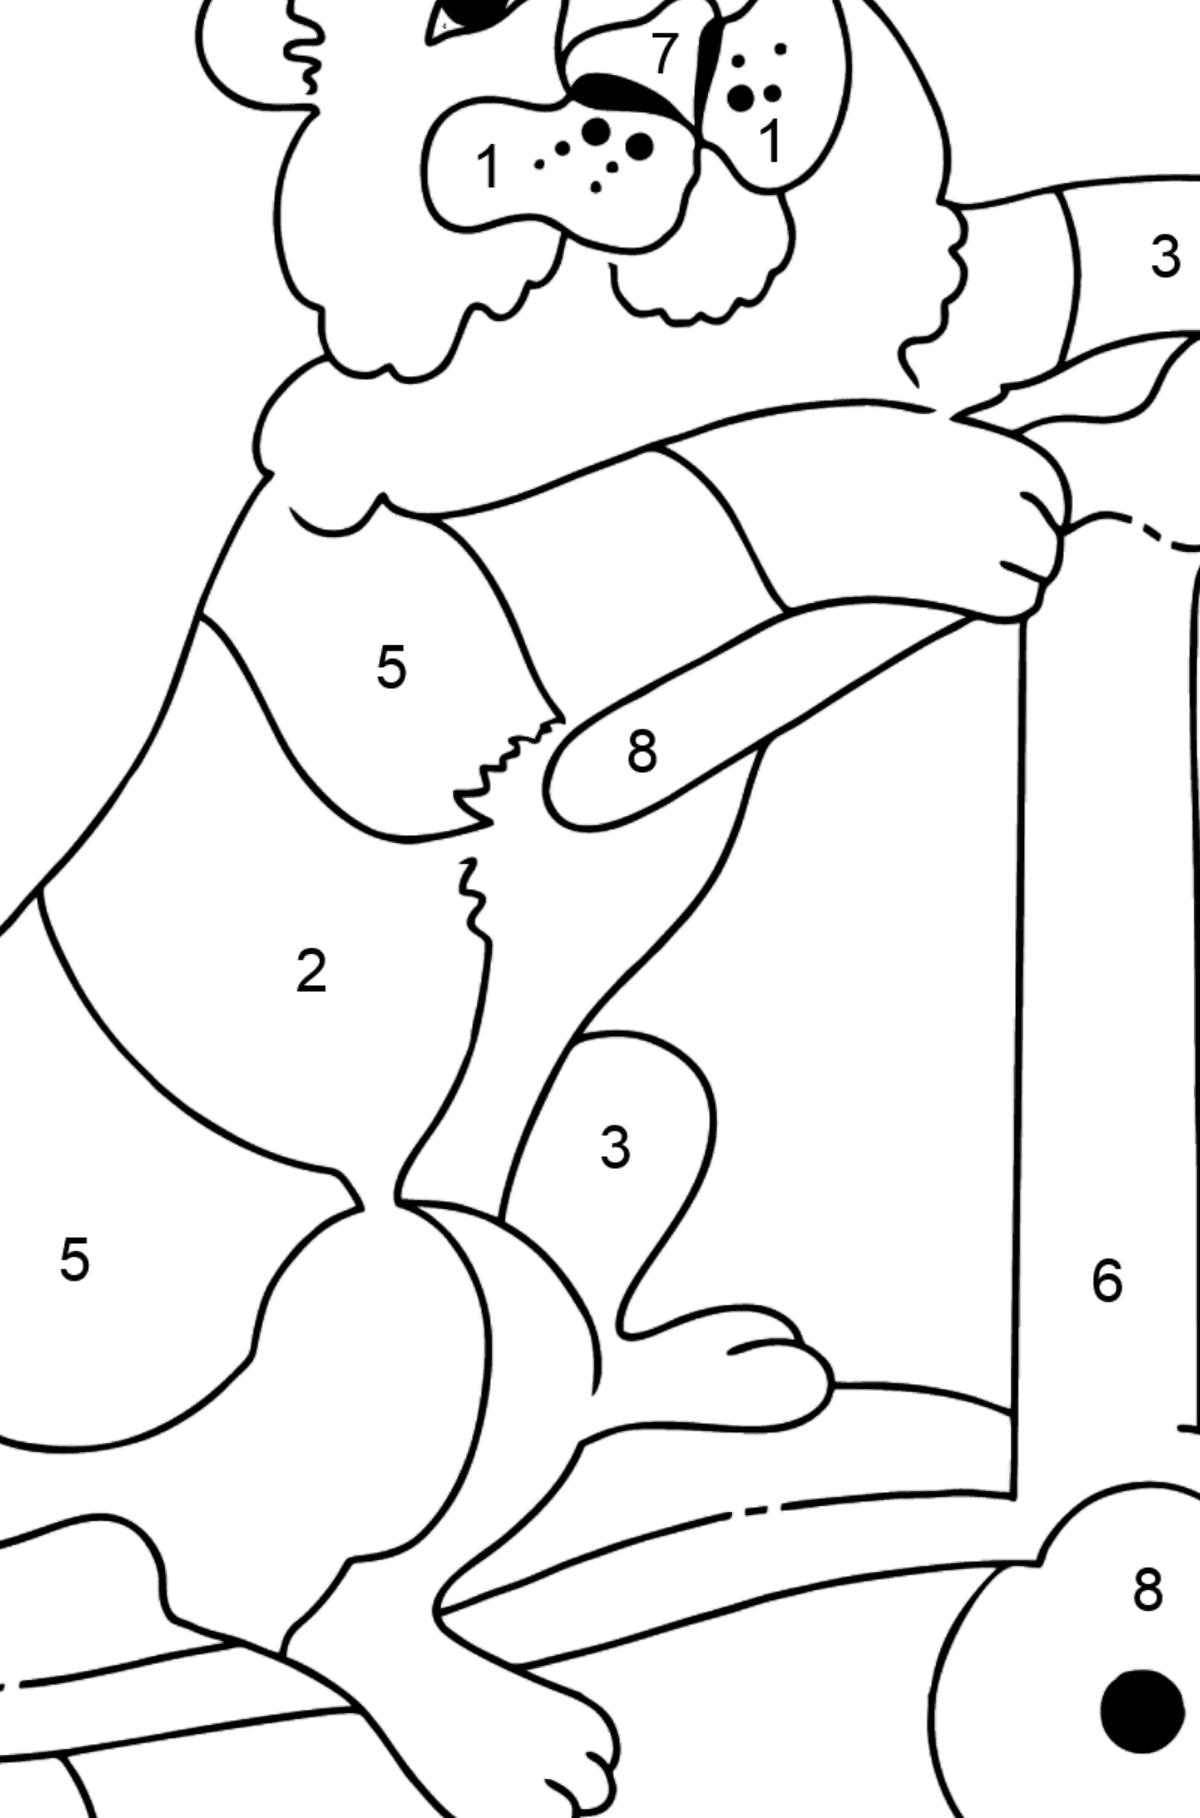 Coloring Page - A Tiger is Learning to Ride a Scooter - Coloring by Numbers for Kids